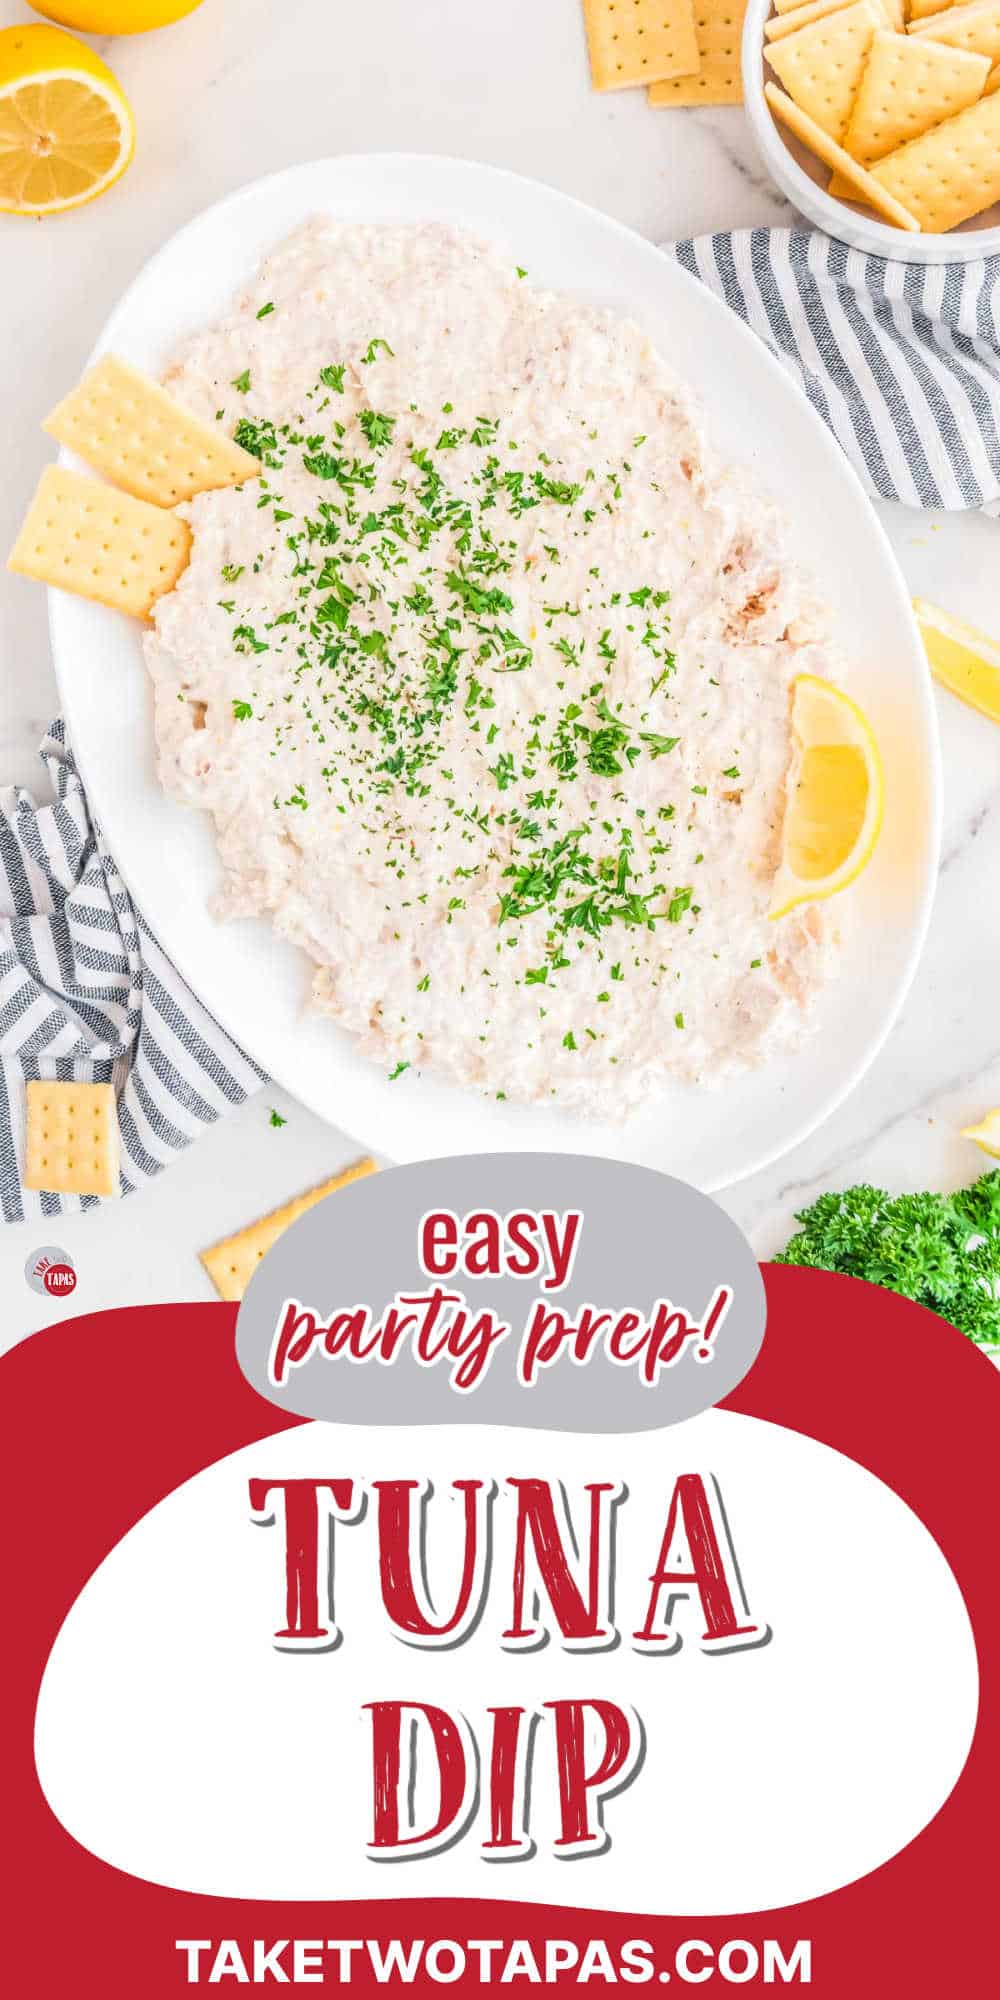 cold tuna dip on a plate with red banner and text